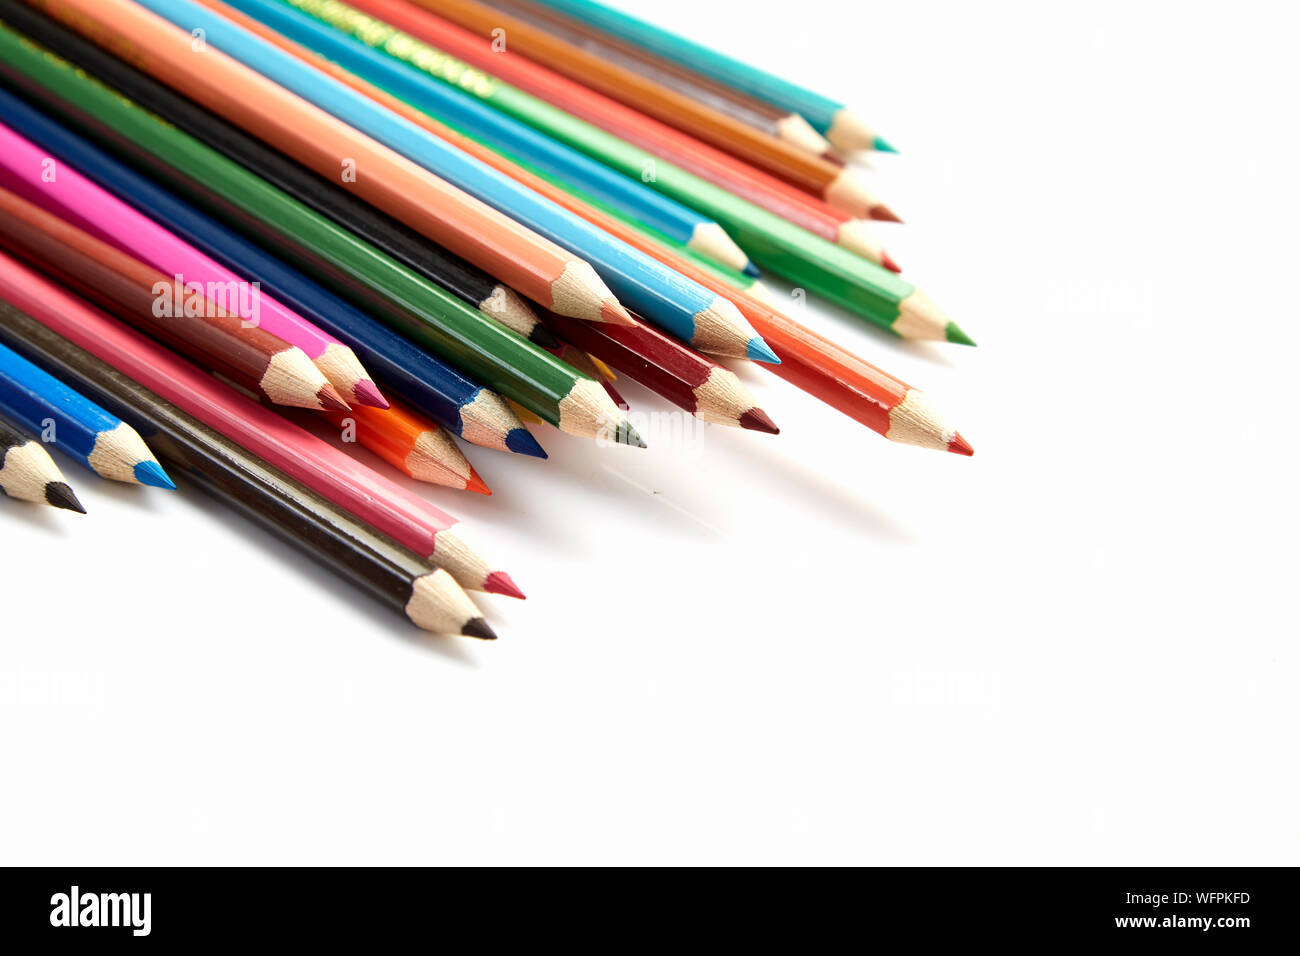 Colored Pencils Over White Background Stock Photo